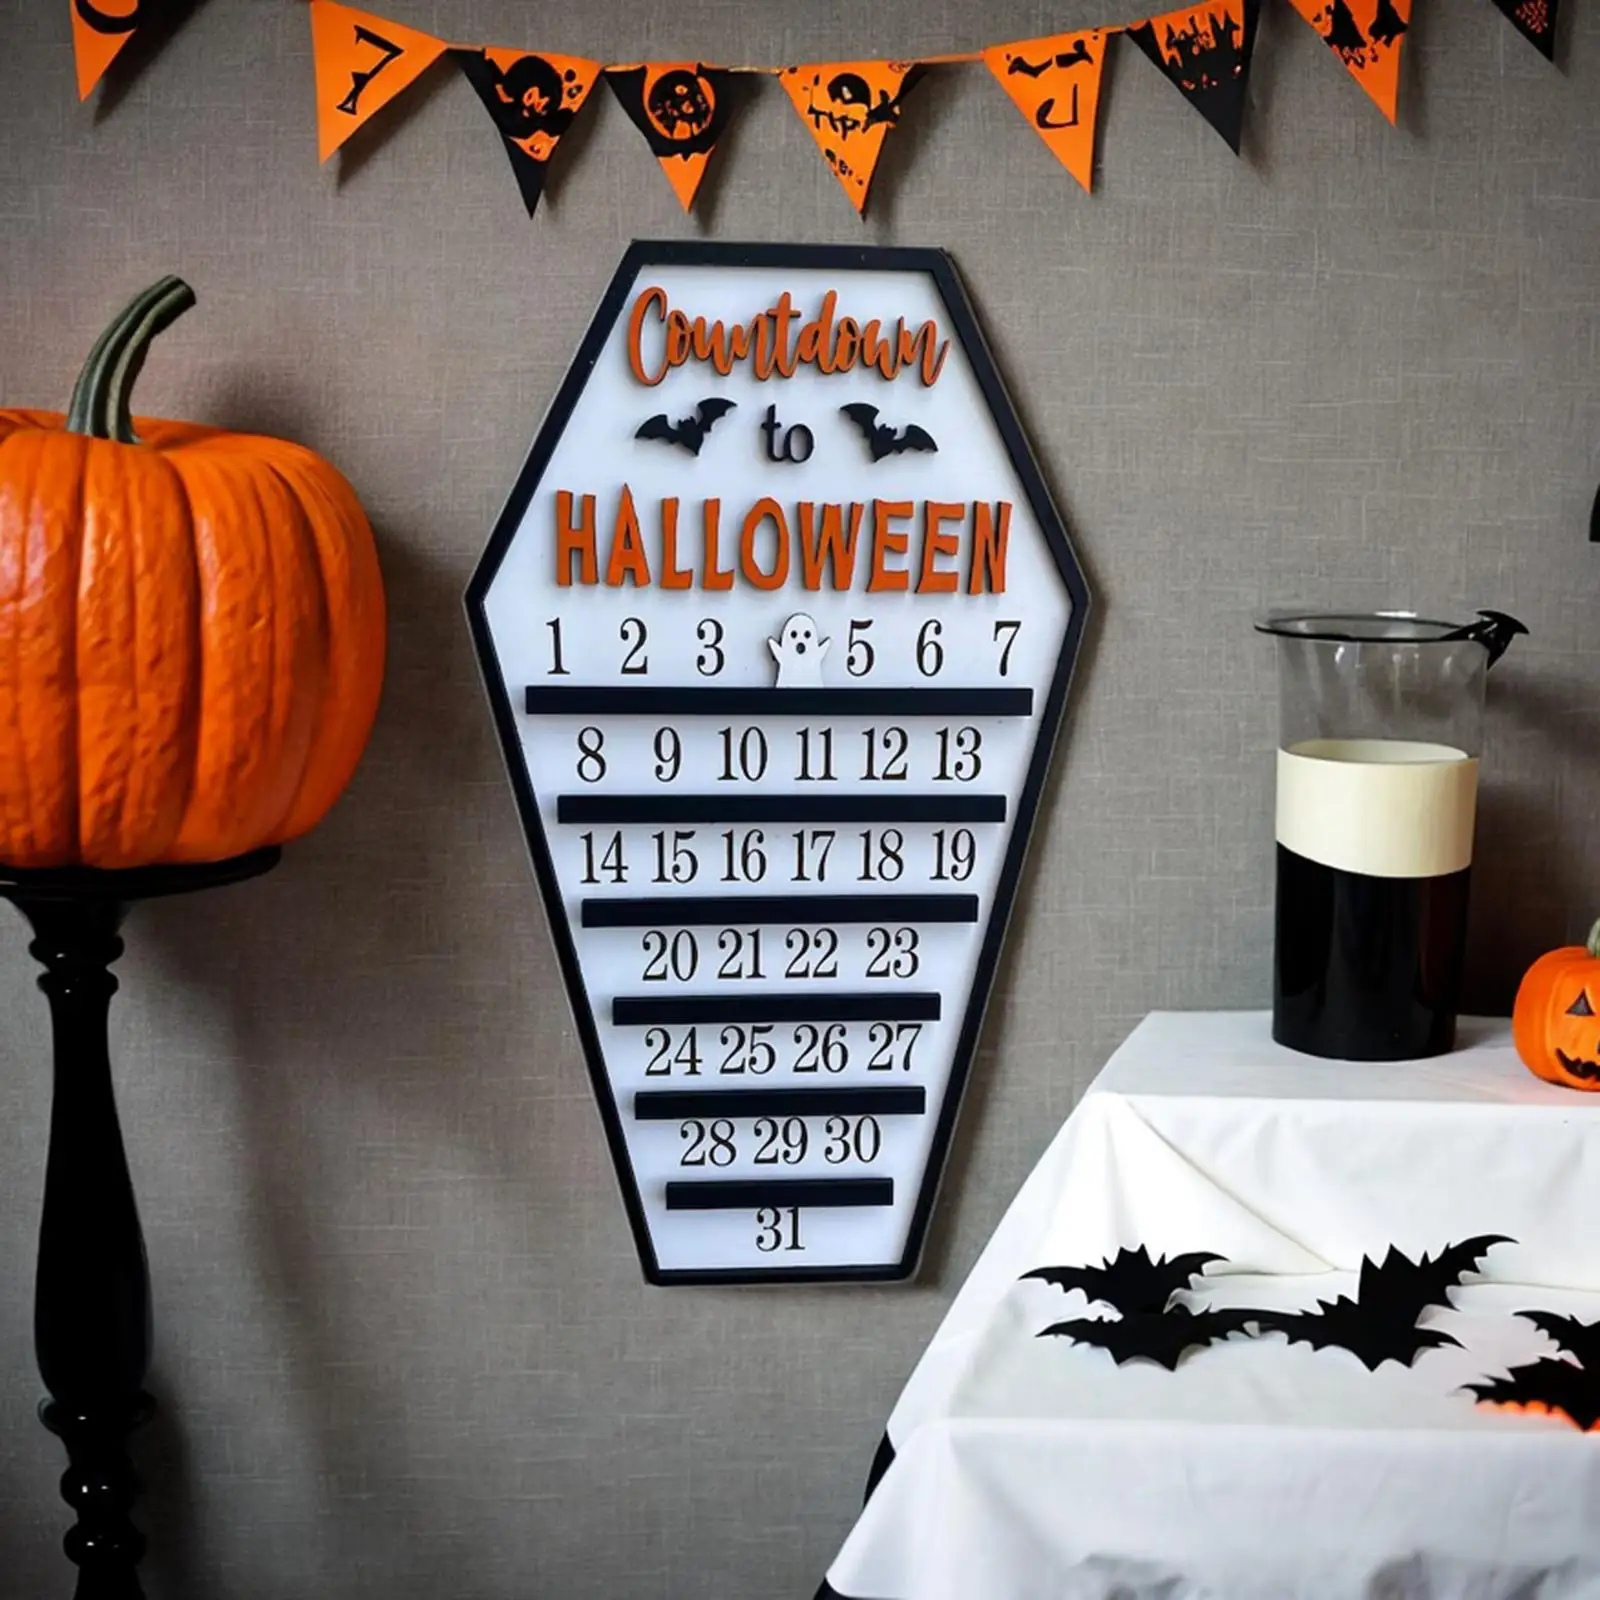 Halloween Decor Countdown Advent Calendar with Bats Decoration Festive Gift with Moving Block for Halloween Party Holiday Home